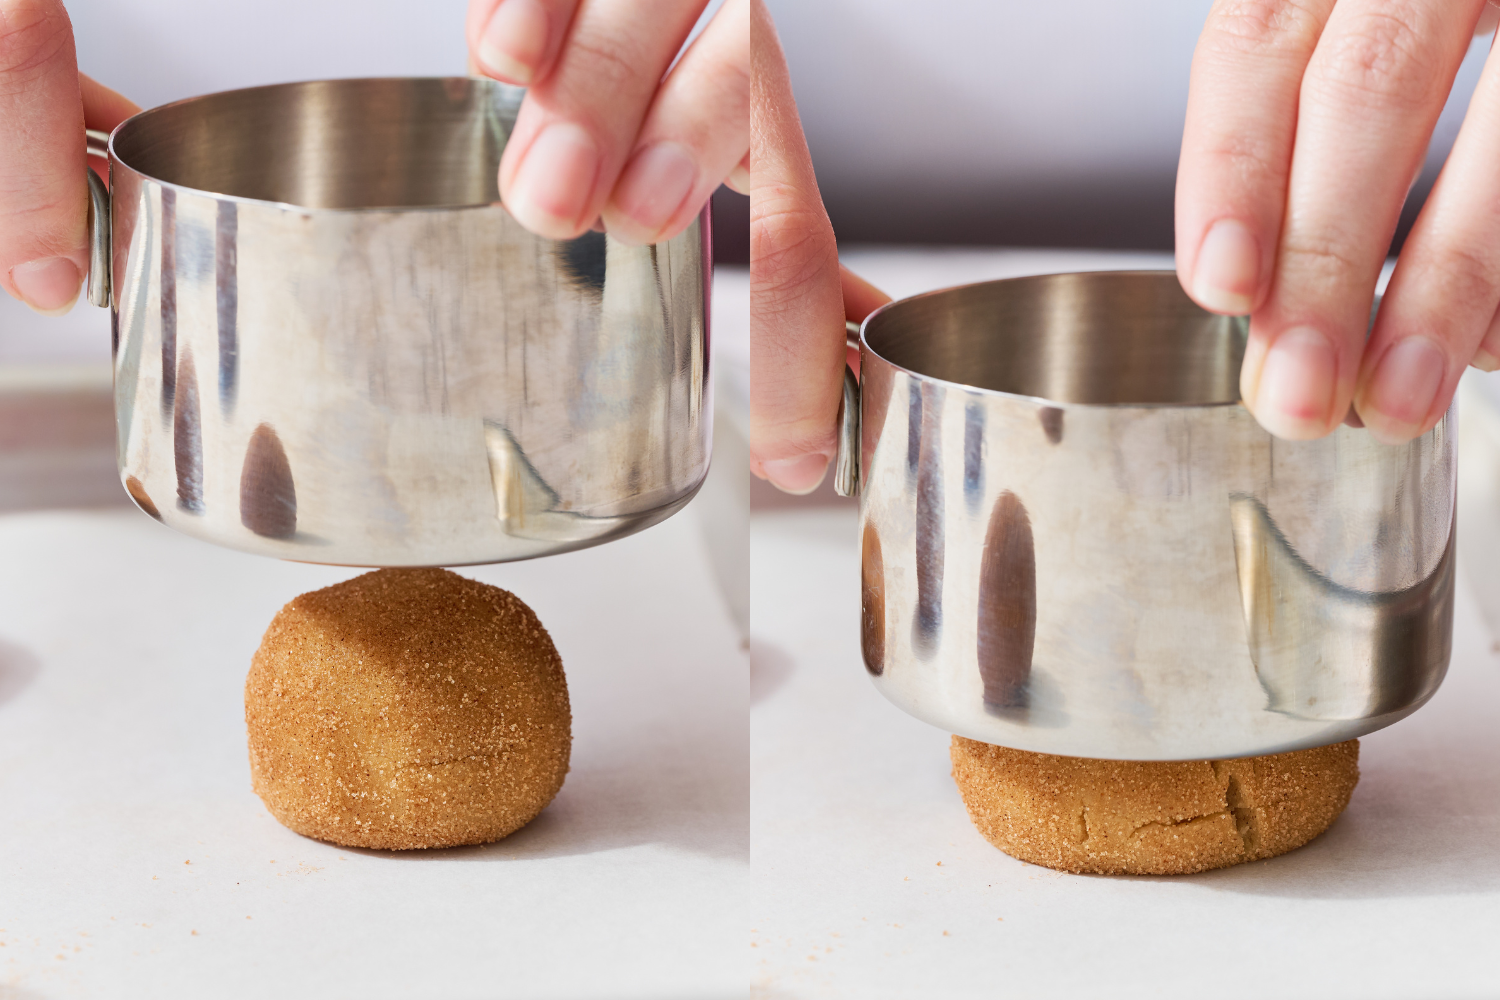 side-by-side images showing Tessa gently pressing down the cookie dough to flatten slightly before baking.